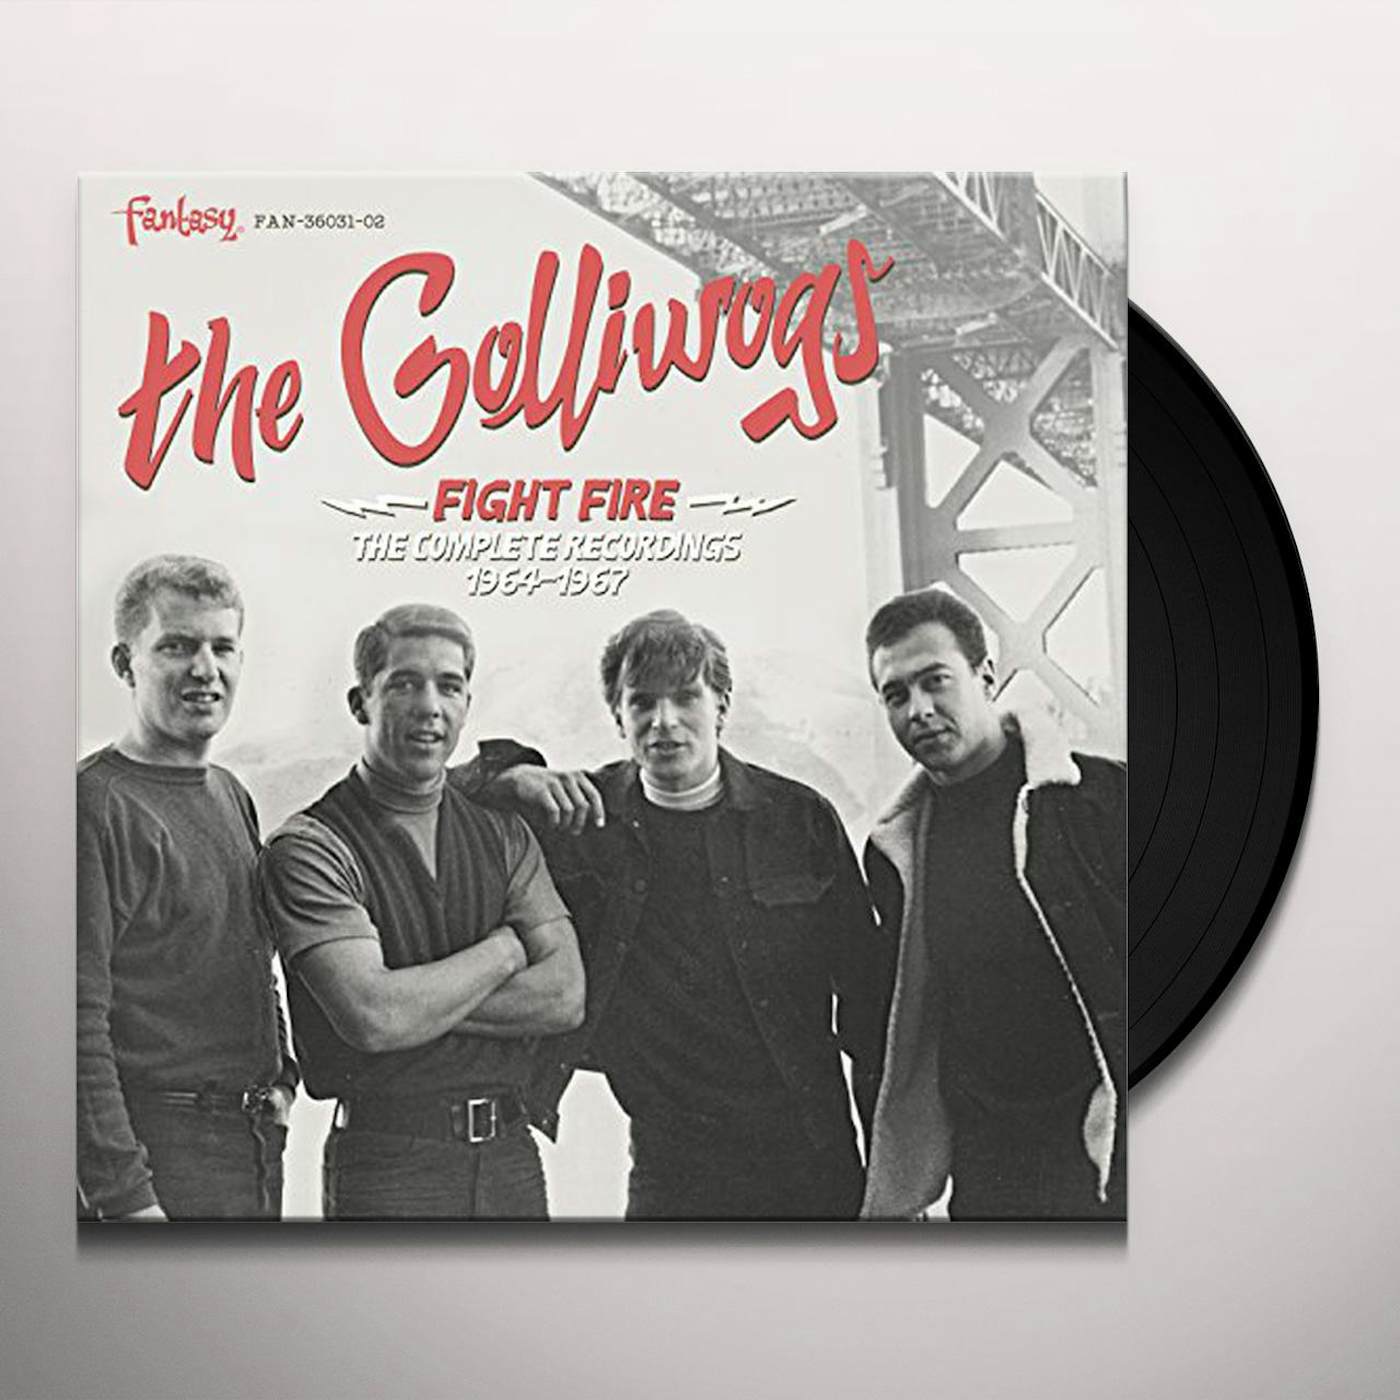 The Golliwogs Fight Fire: The Complete Recordings 1964-1967 Vinyl Record